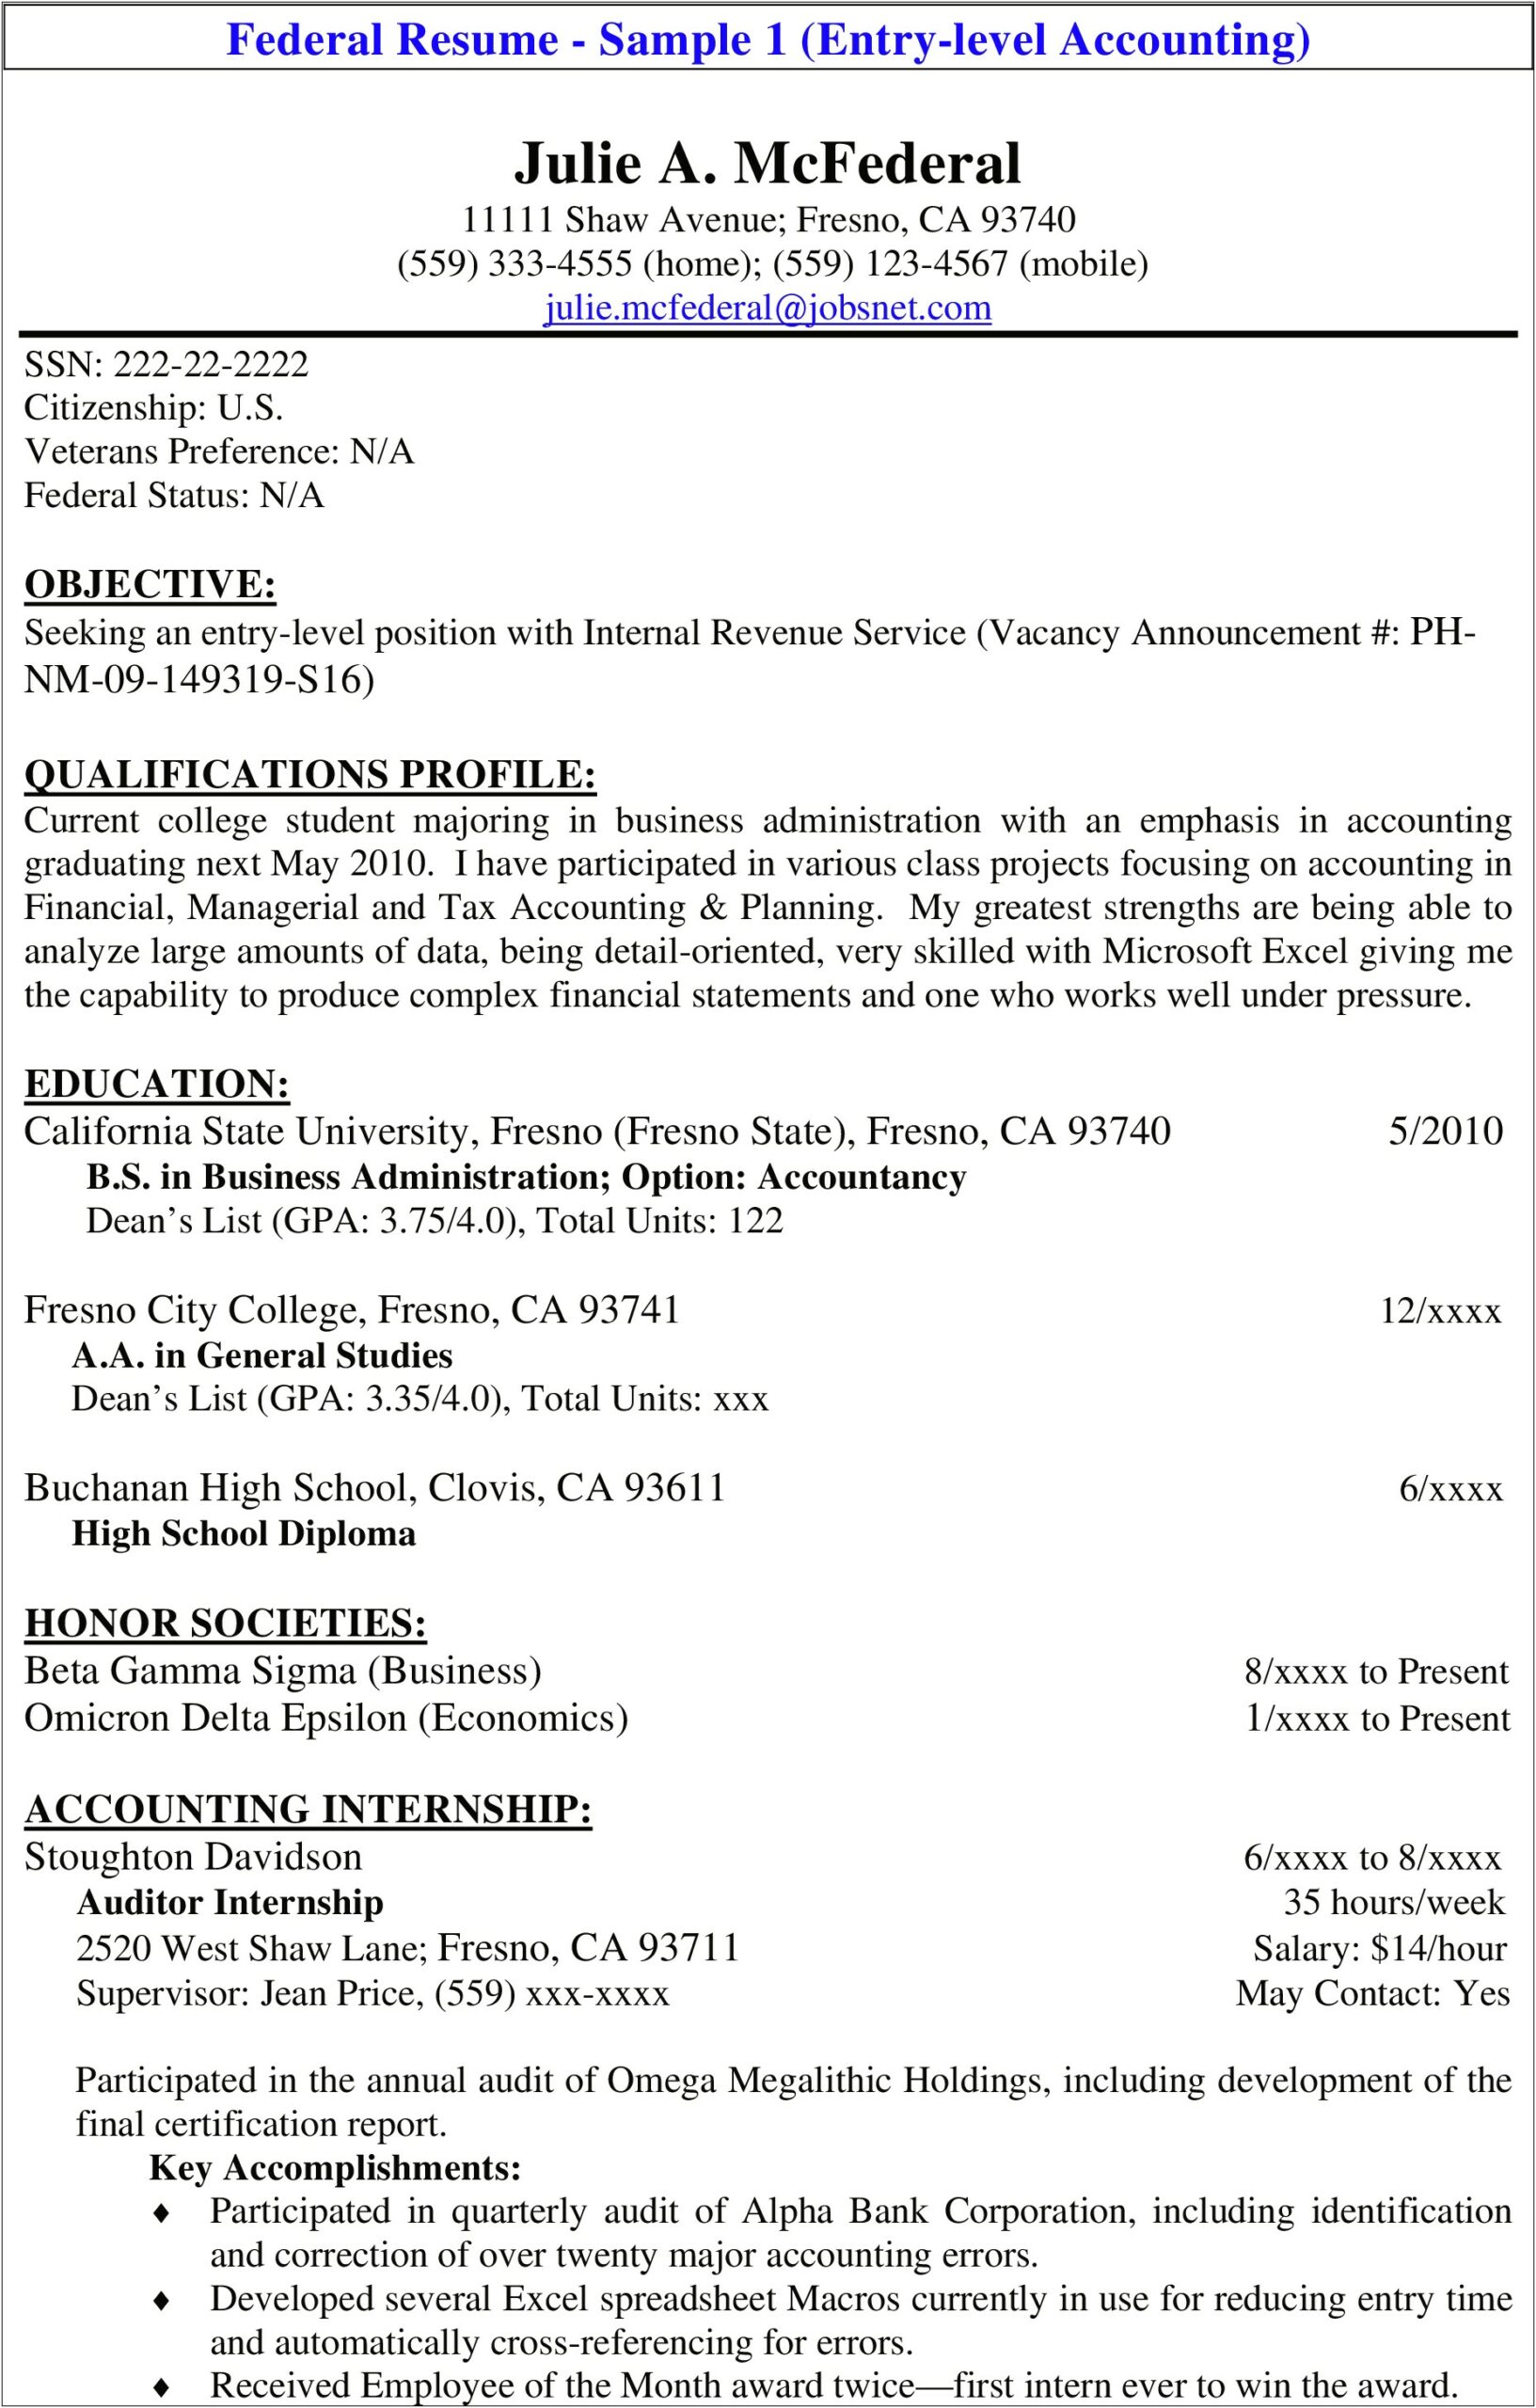 Entry Level Resume Samples For Accounting